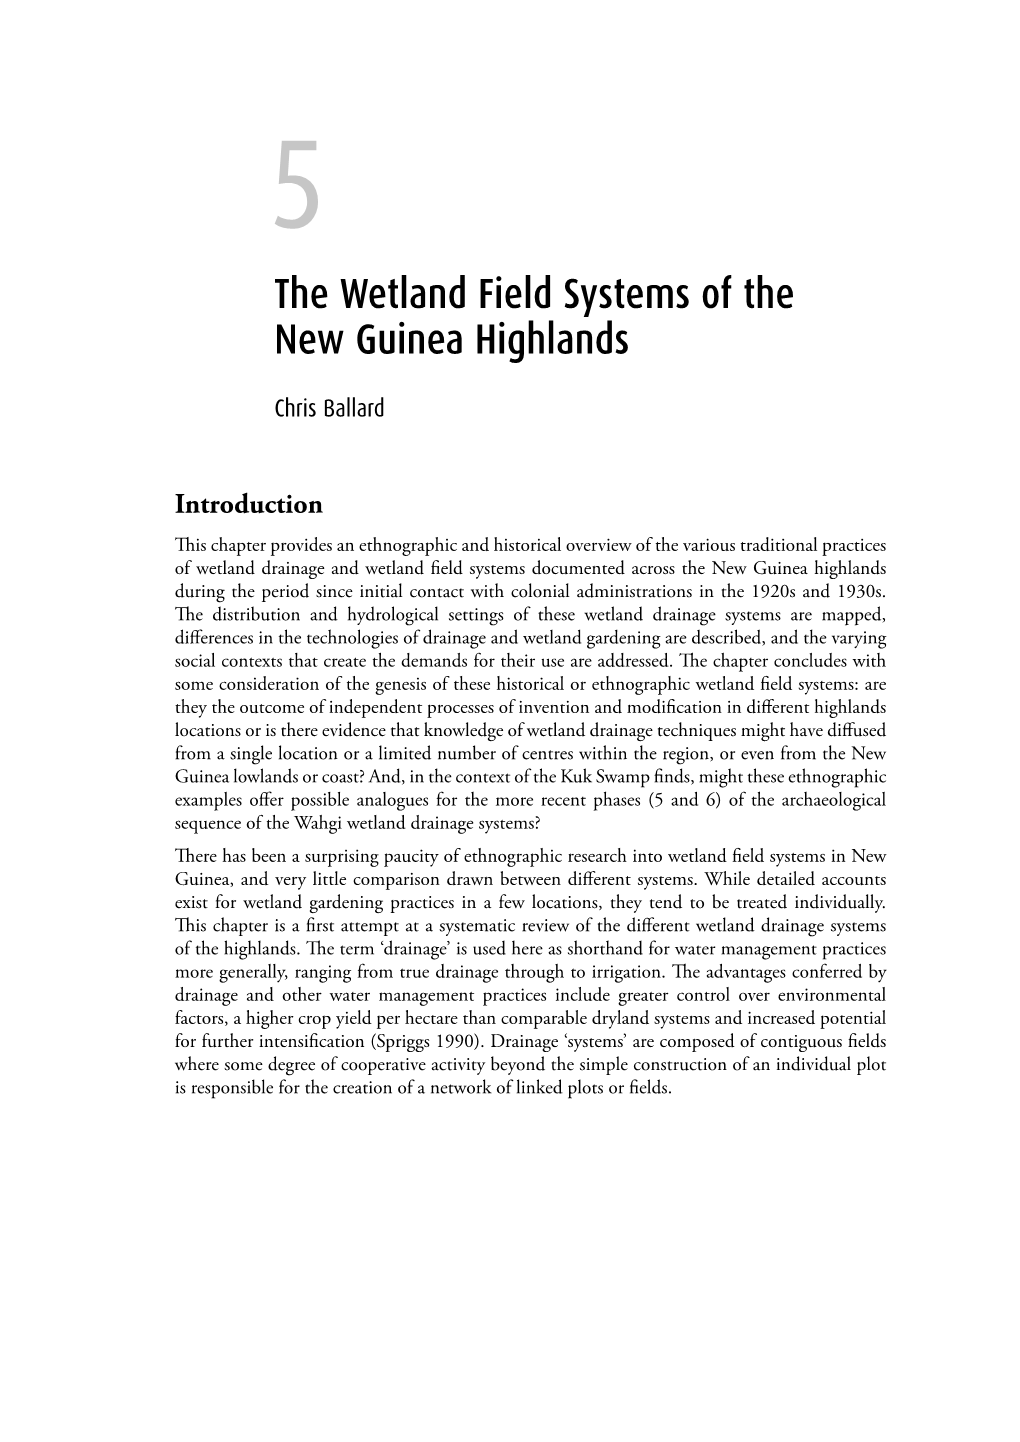 The Wetland Field Systems of the New Guinea Highlands